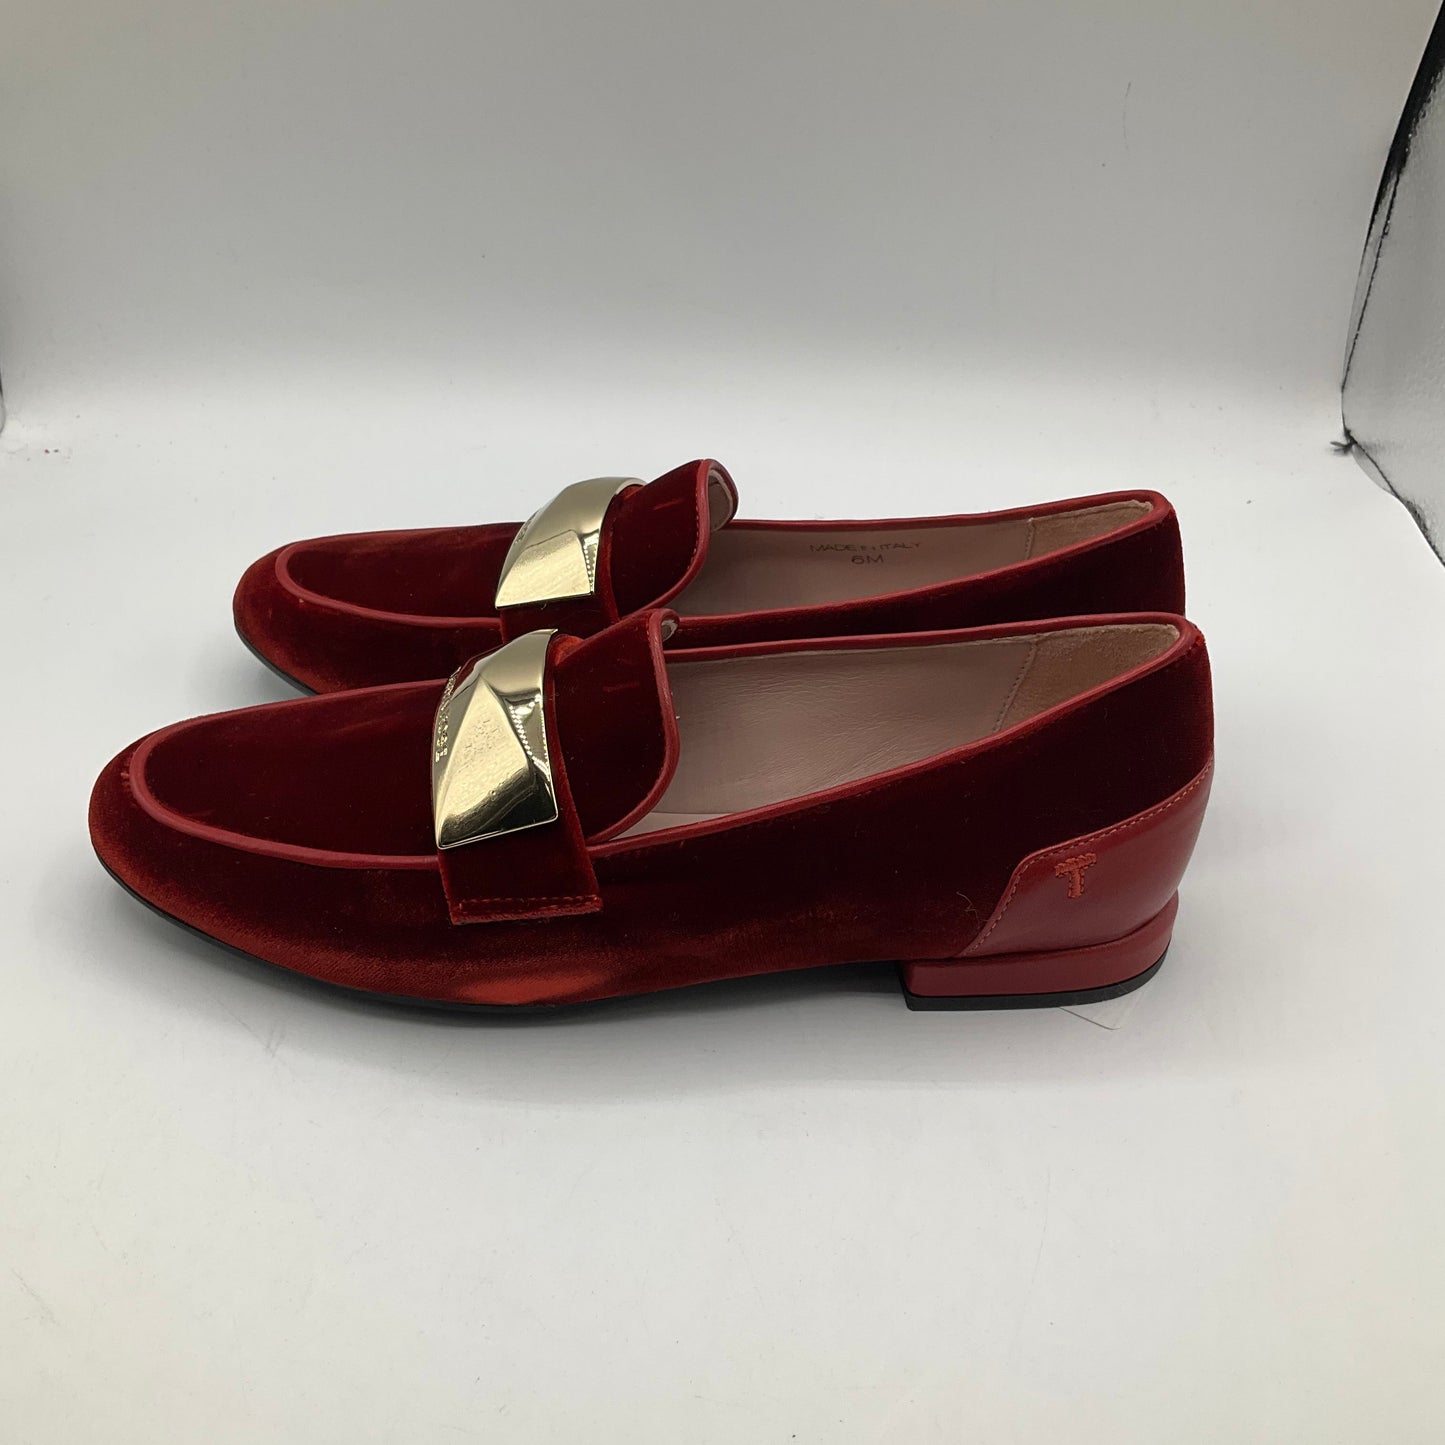 Red Shoes Flats Taryn Rose, Size 6